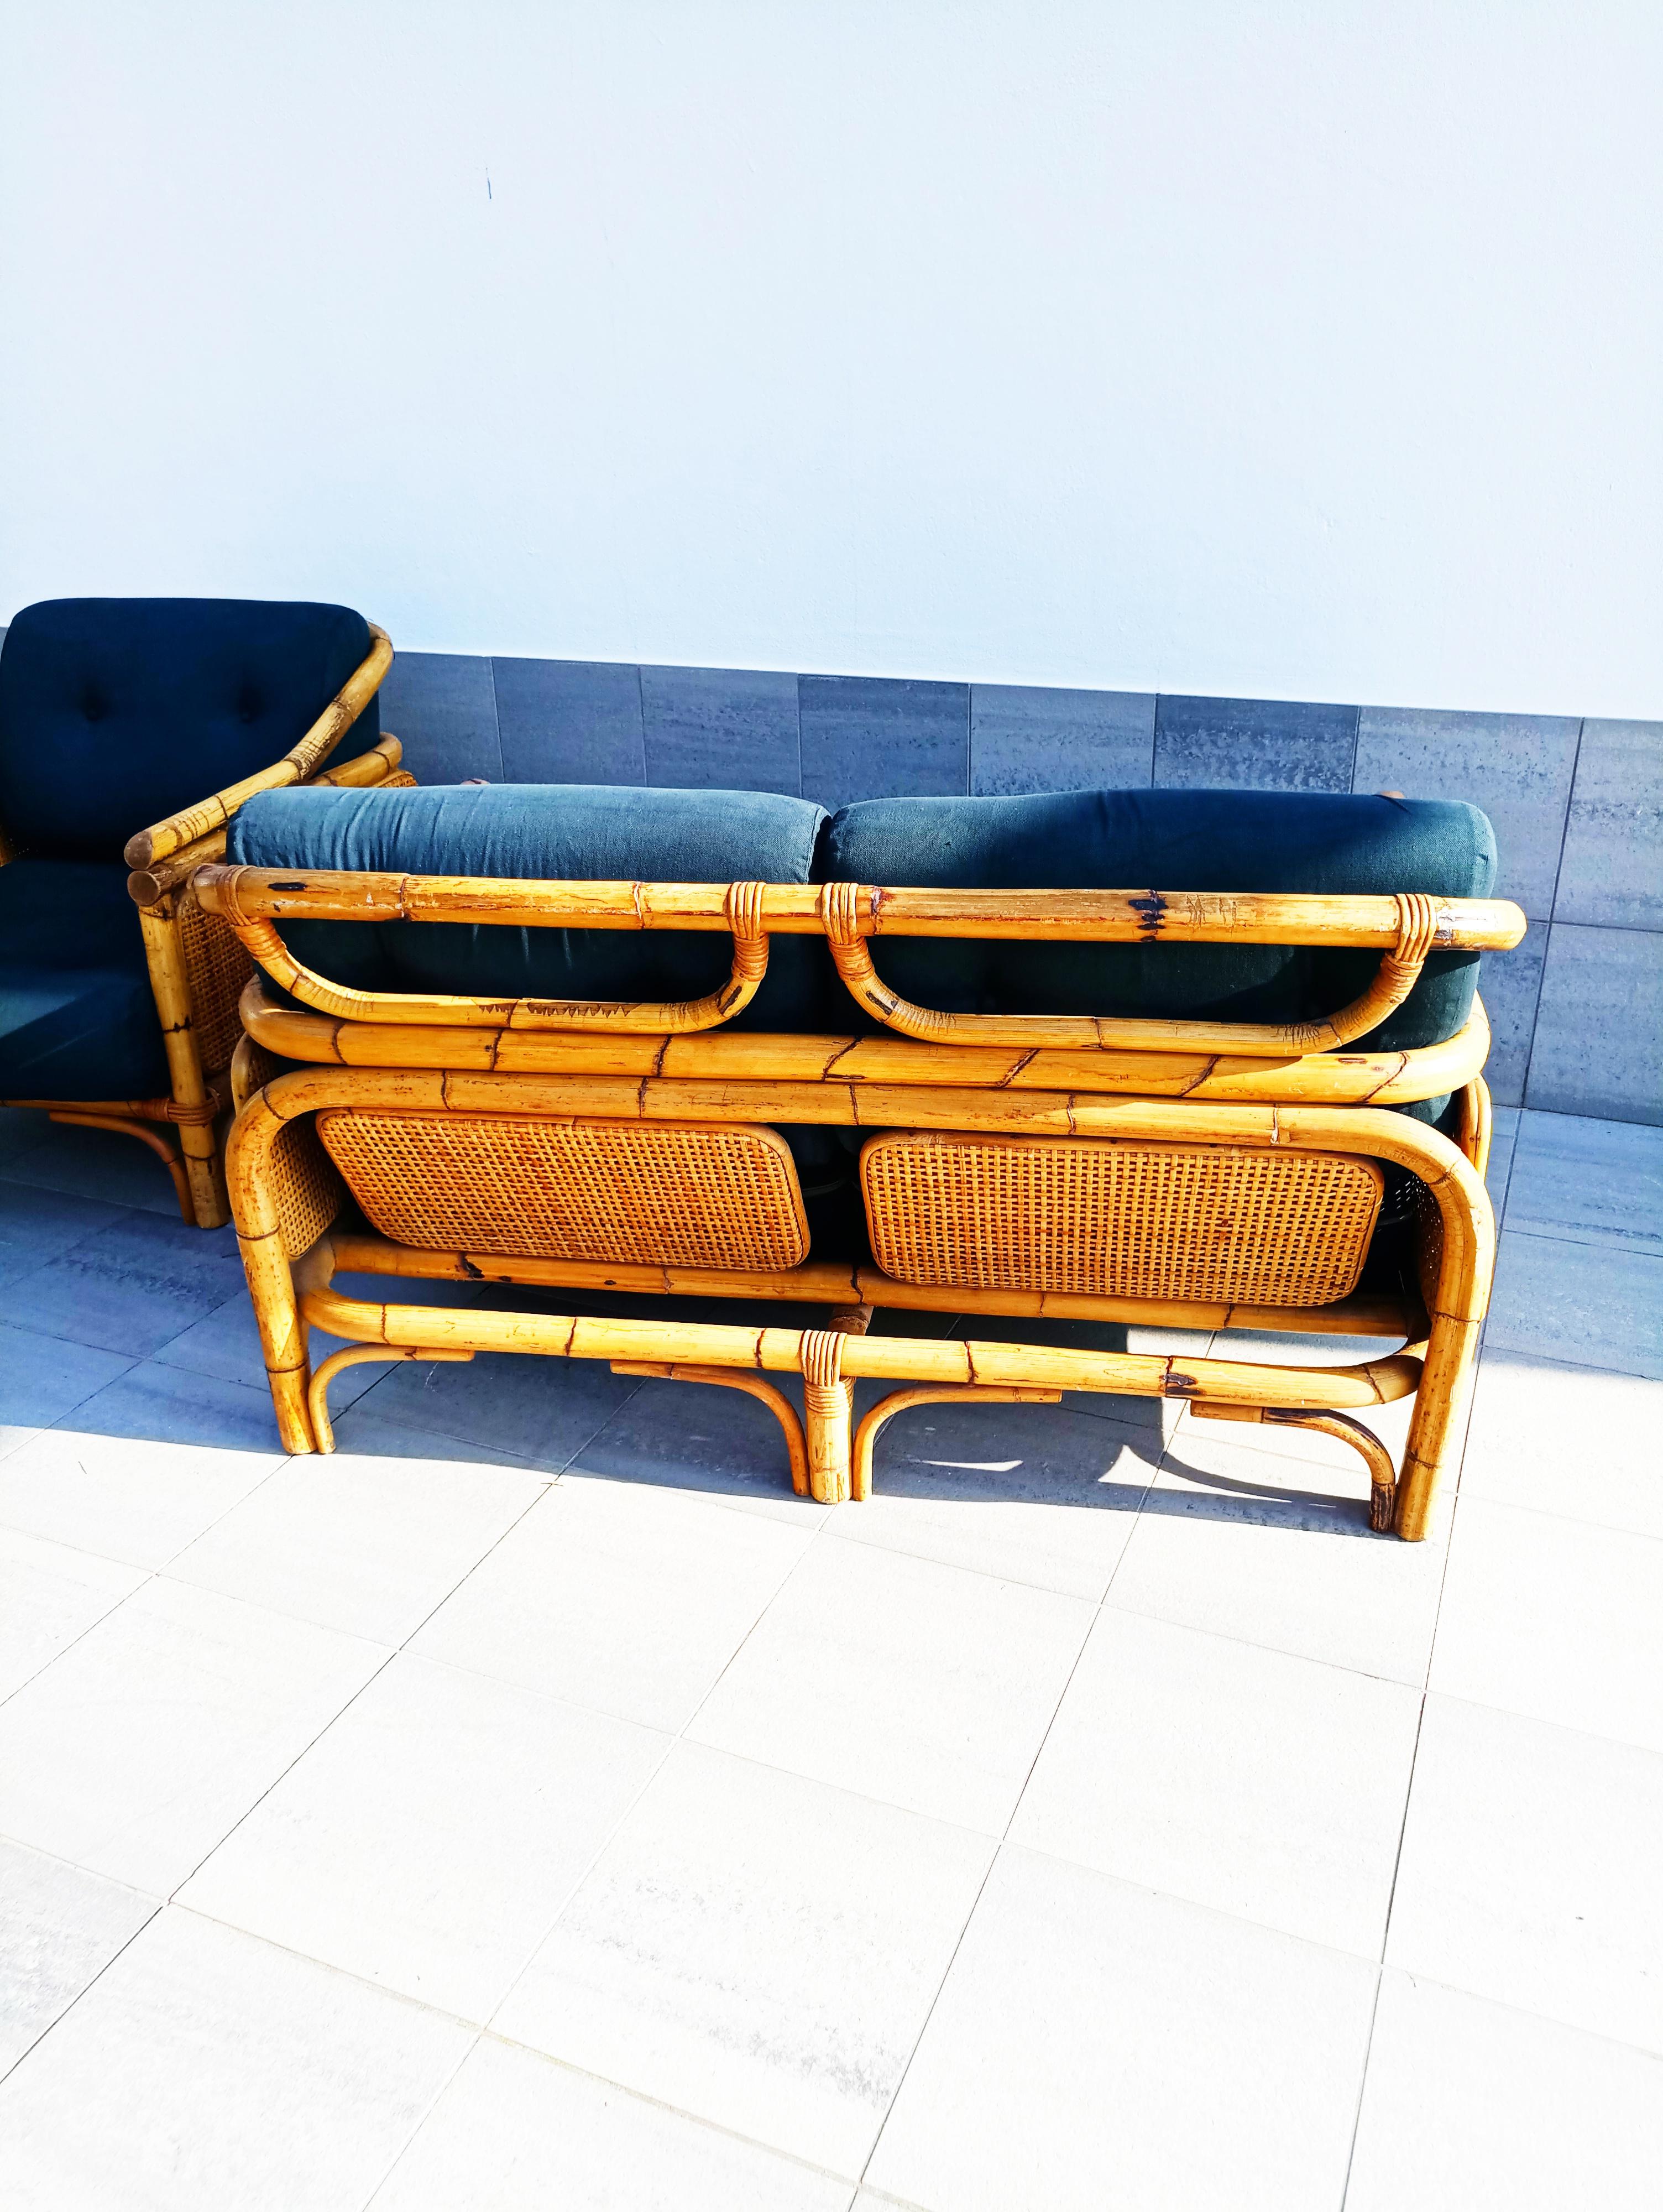 Beautiful and rare set of rattan and bamboo armchair and sofa, manufactured in France in 1960s. In perfect vintage condition.
Armchair (cm): 70 W x 90 D x 70 H
Sofa (cm): 130 W x 90 D x 70 H
Seat height (cm): 32 H.